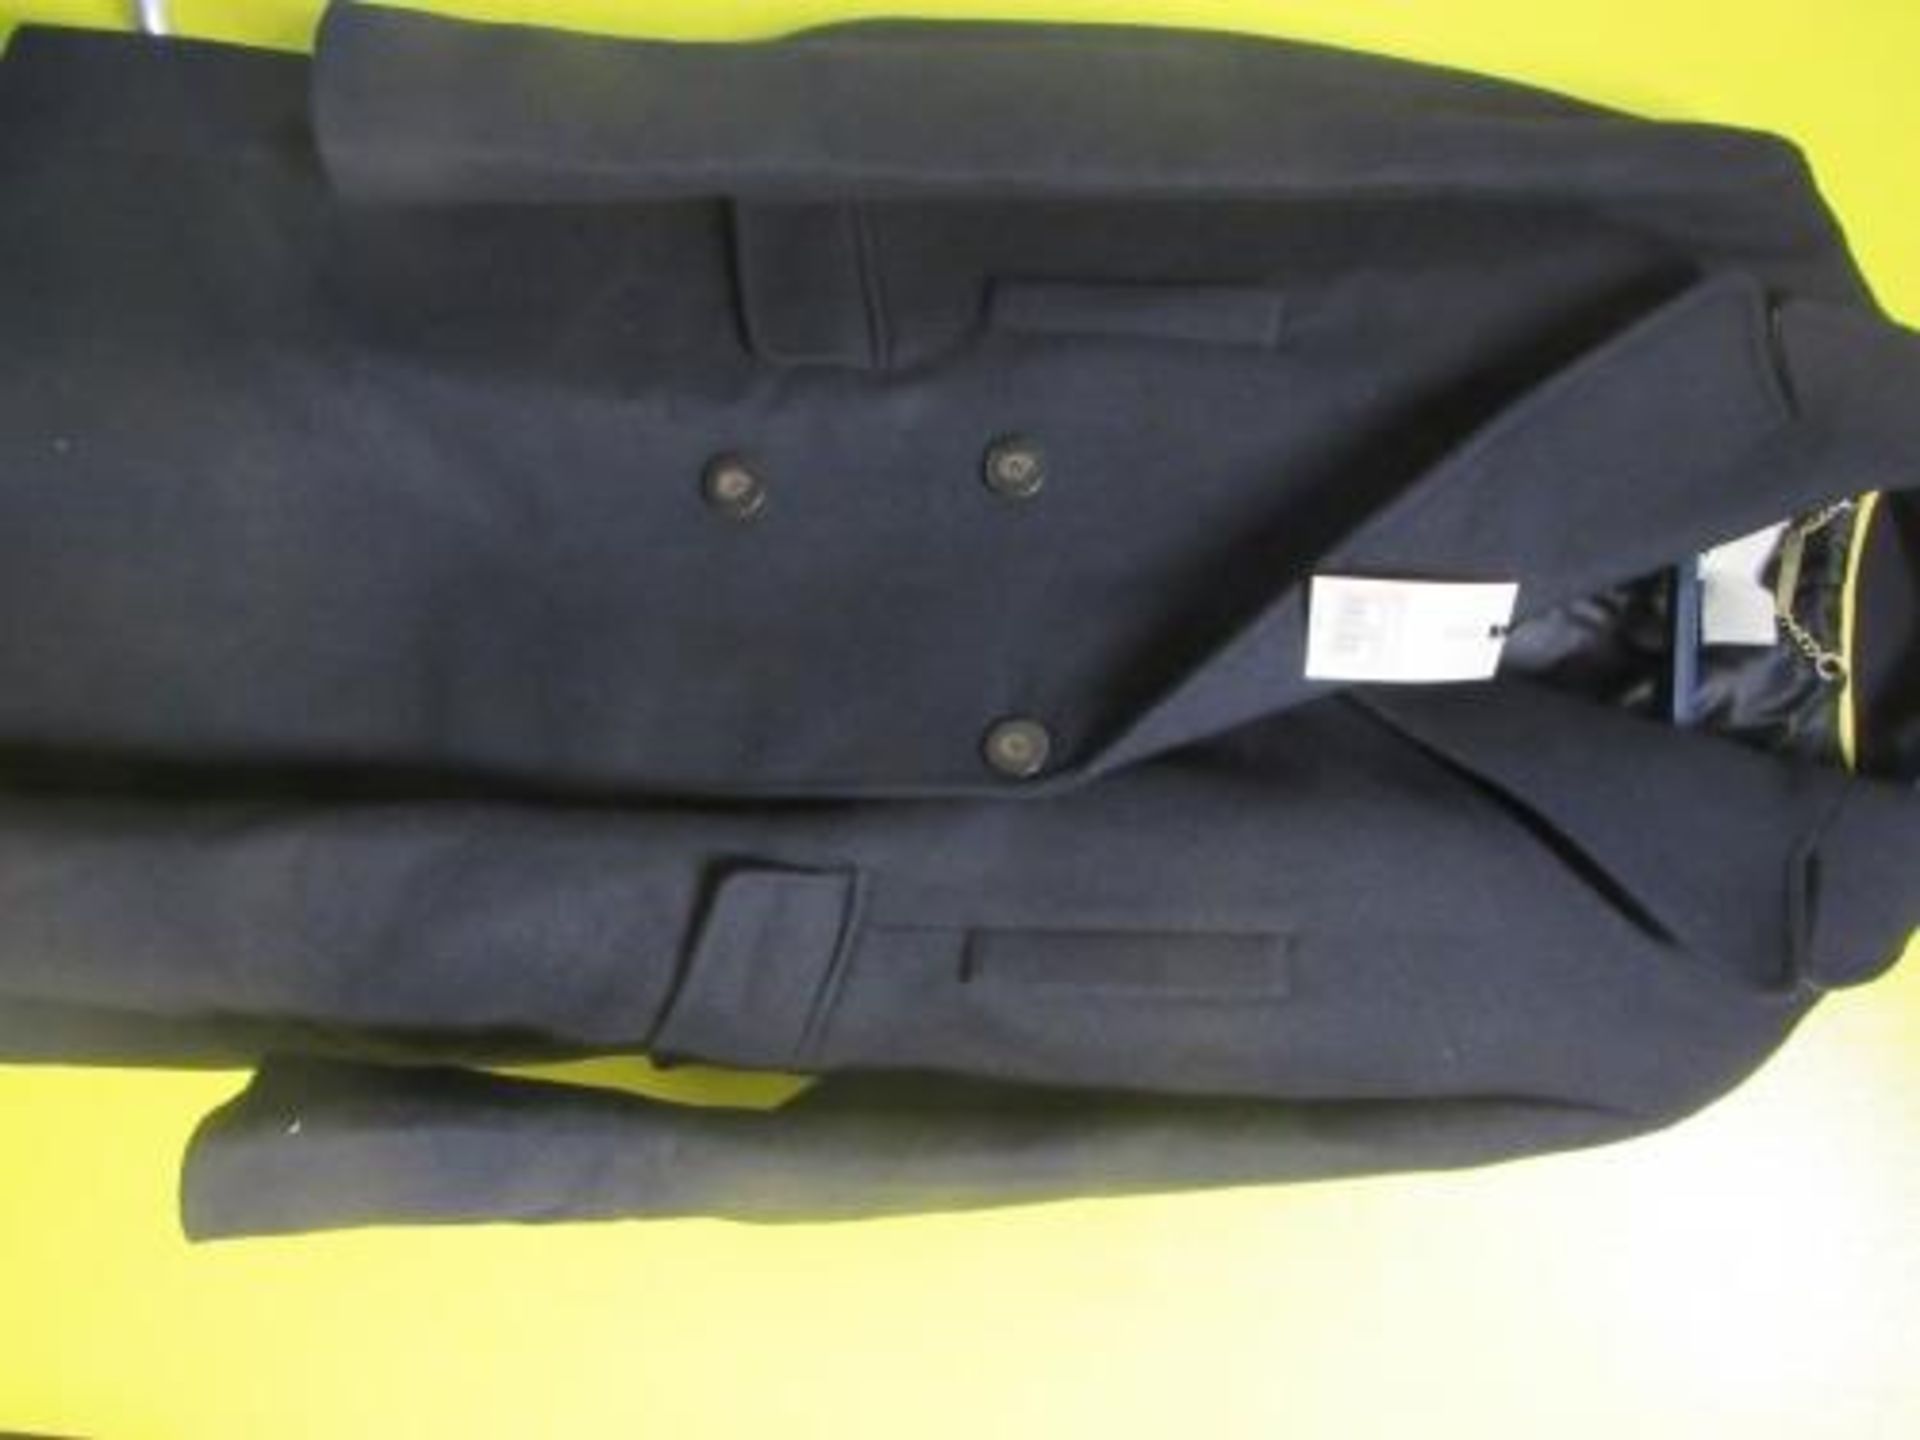 1 x Hobbs Andie navy coat, size 10 - New with tags (crail1)